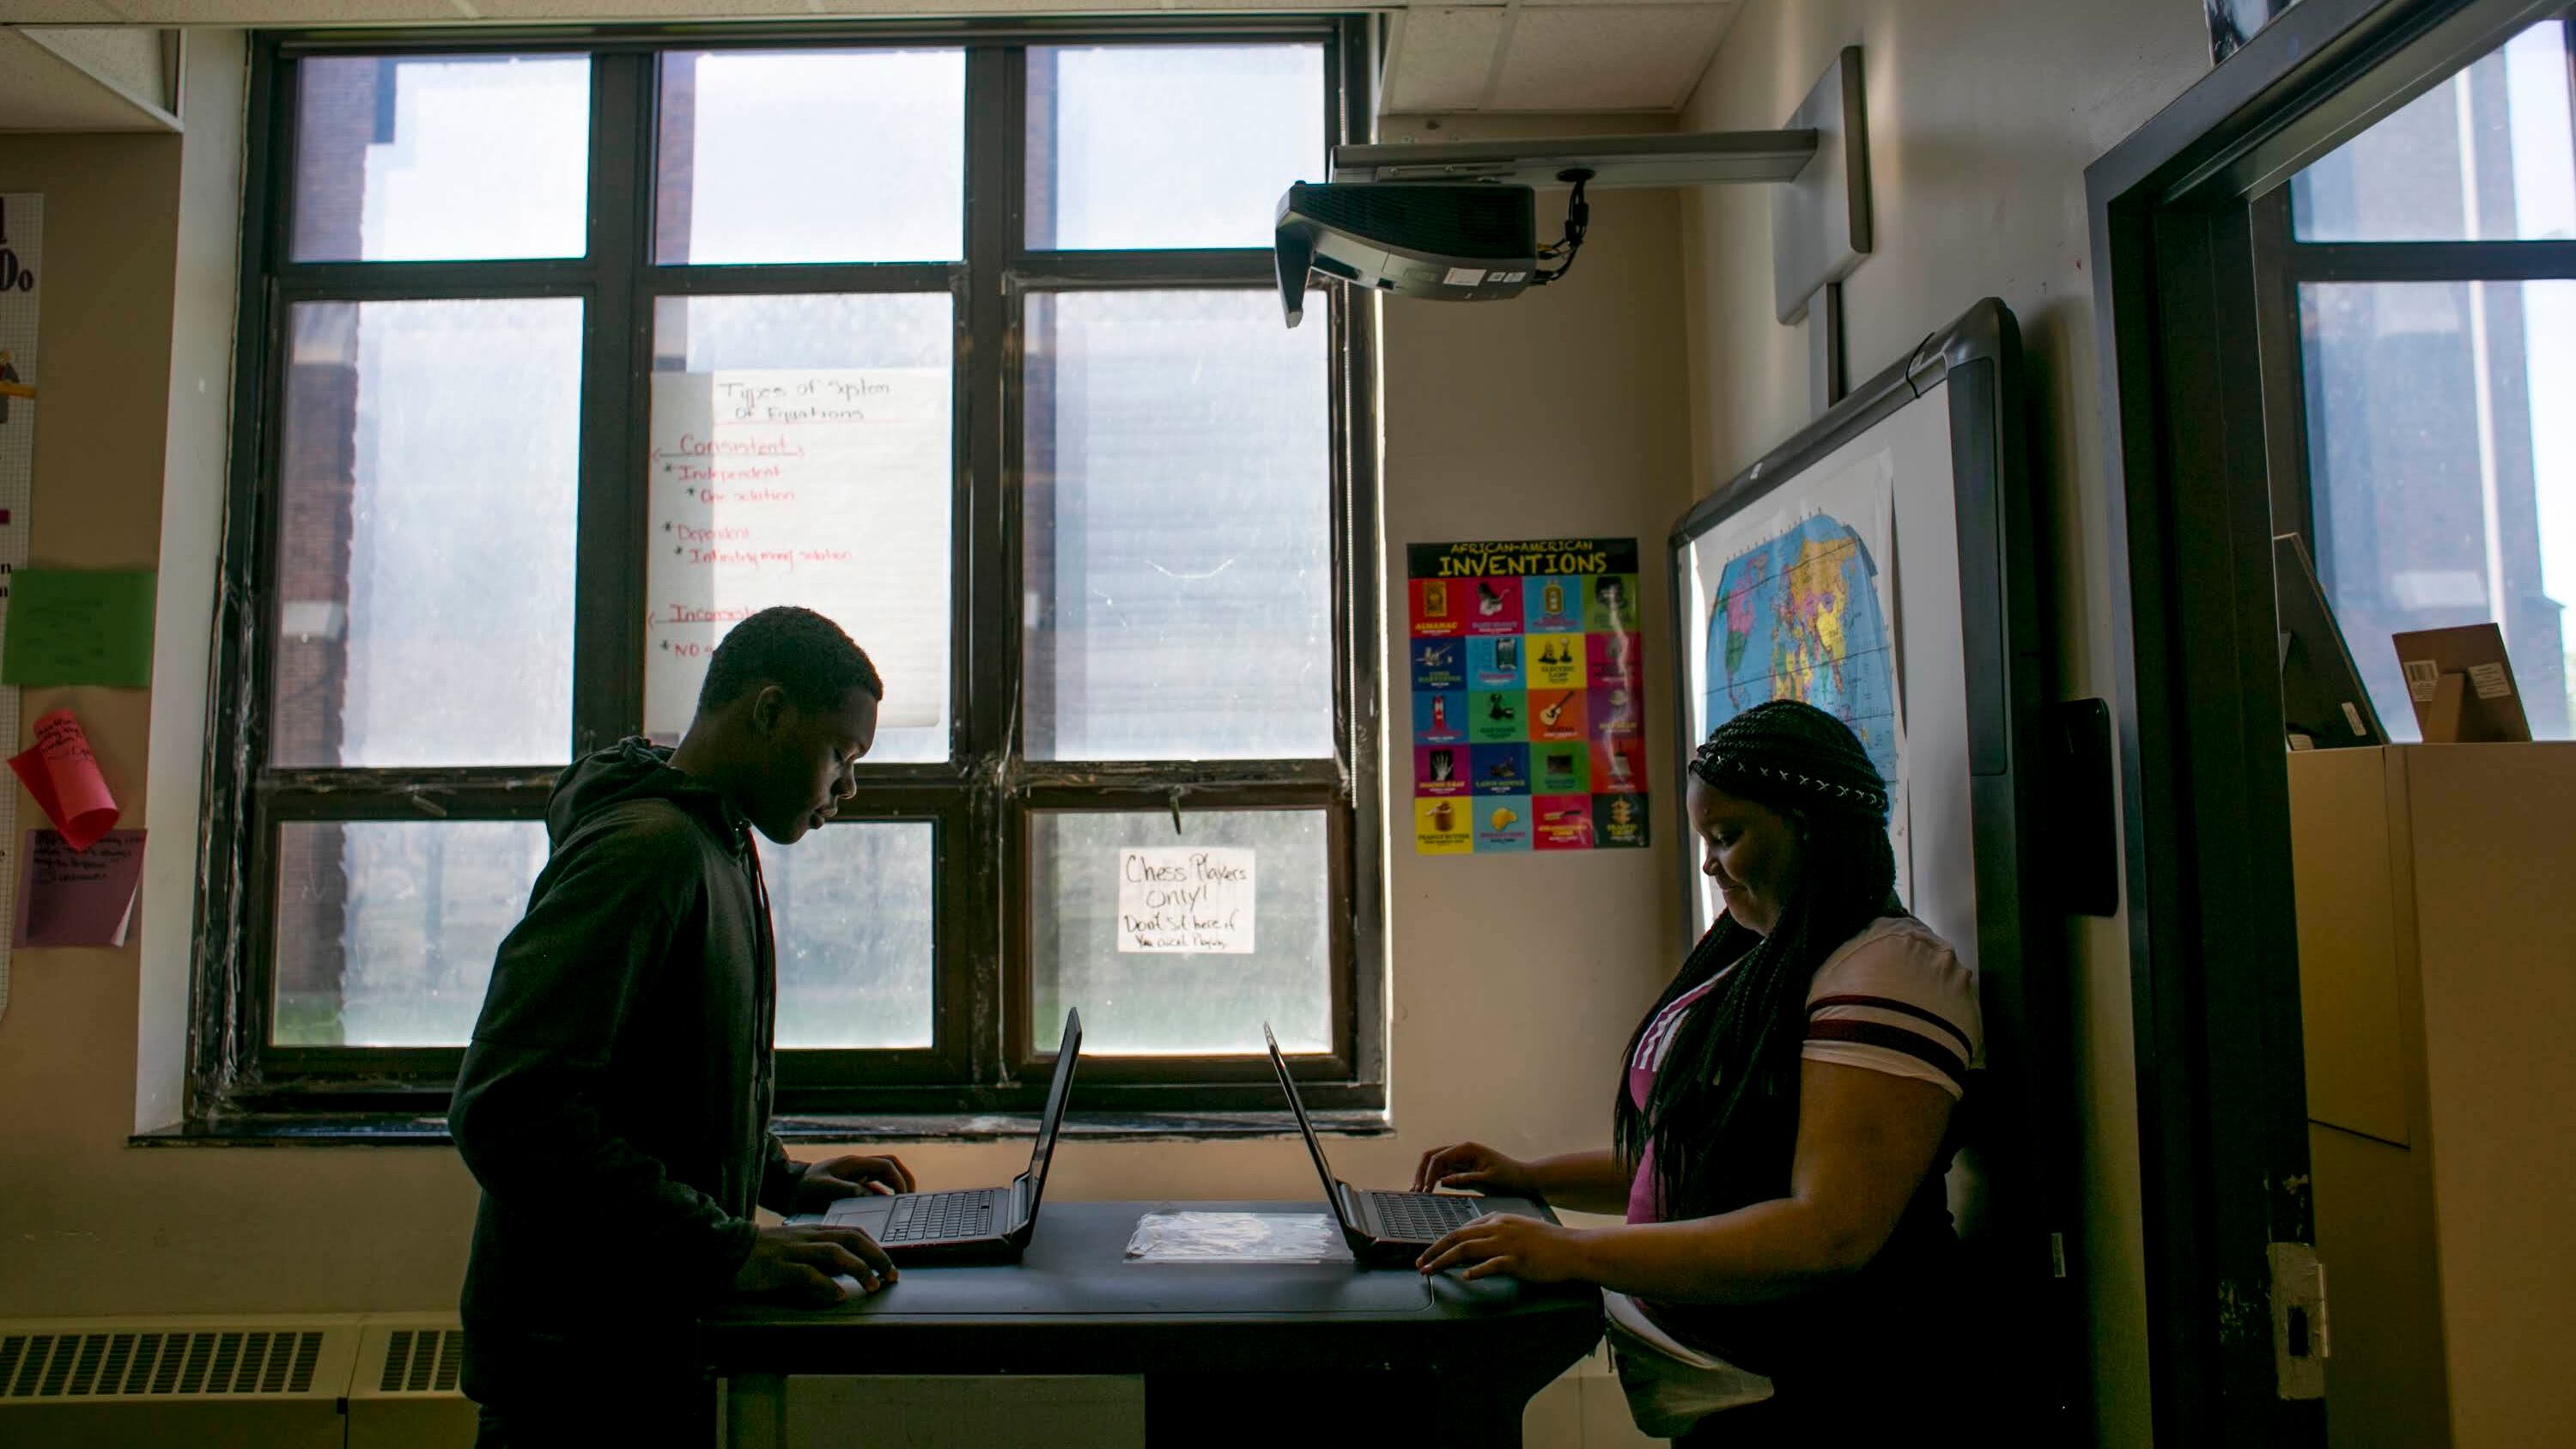 Two people sit in a shadowy classroom working on their laptops.